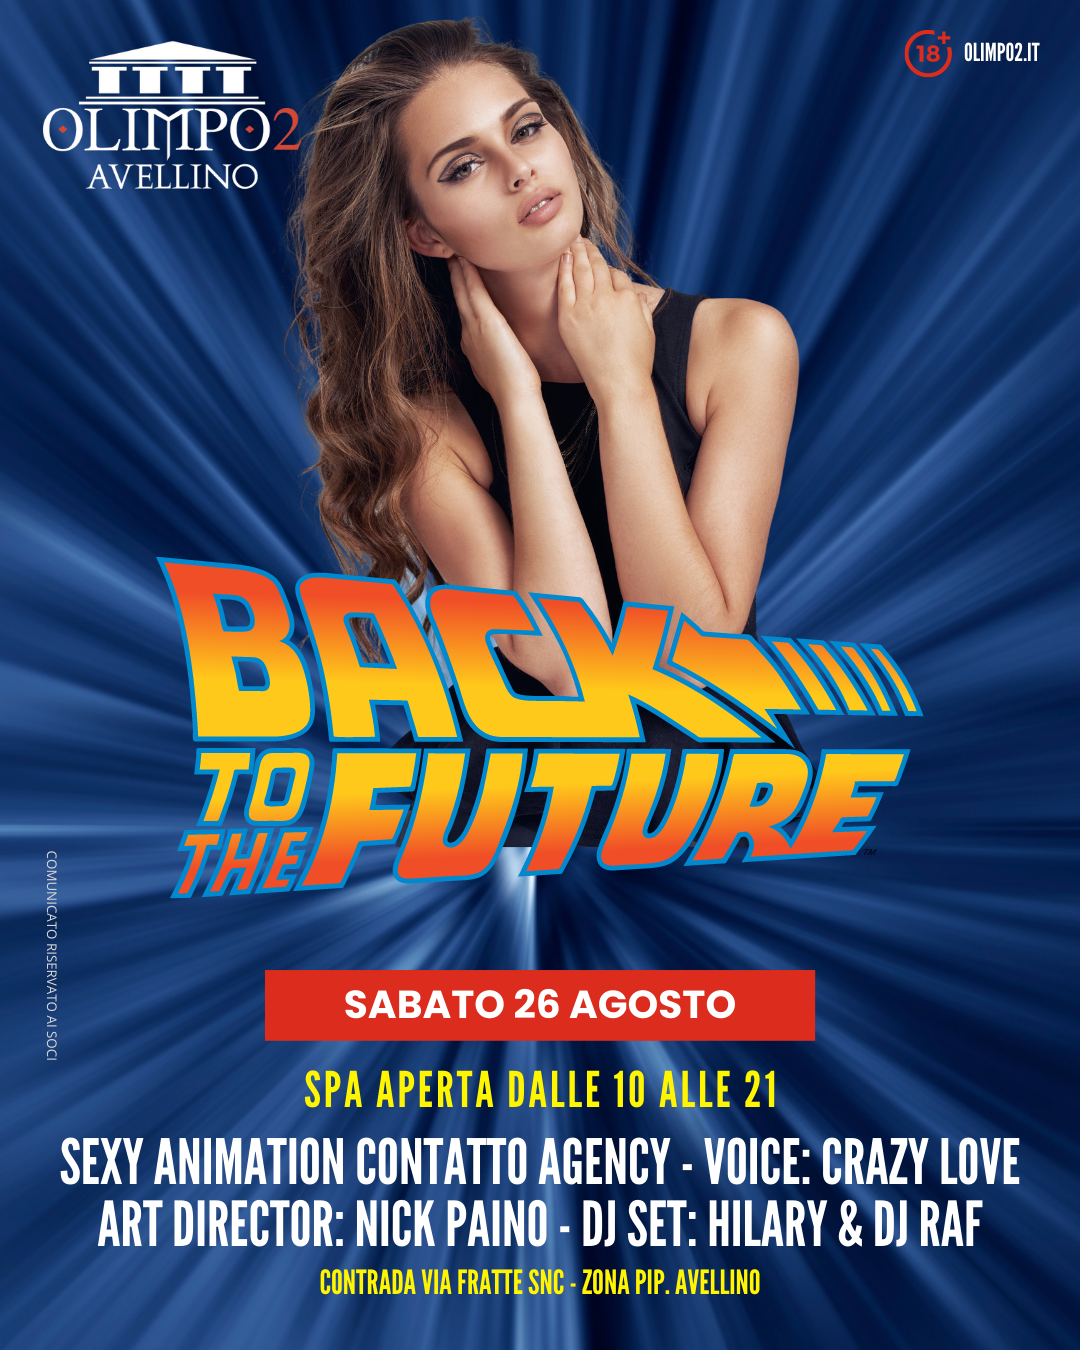 back to the future party olimpo 2 avellino